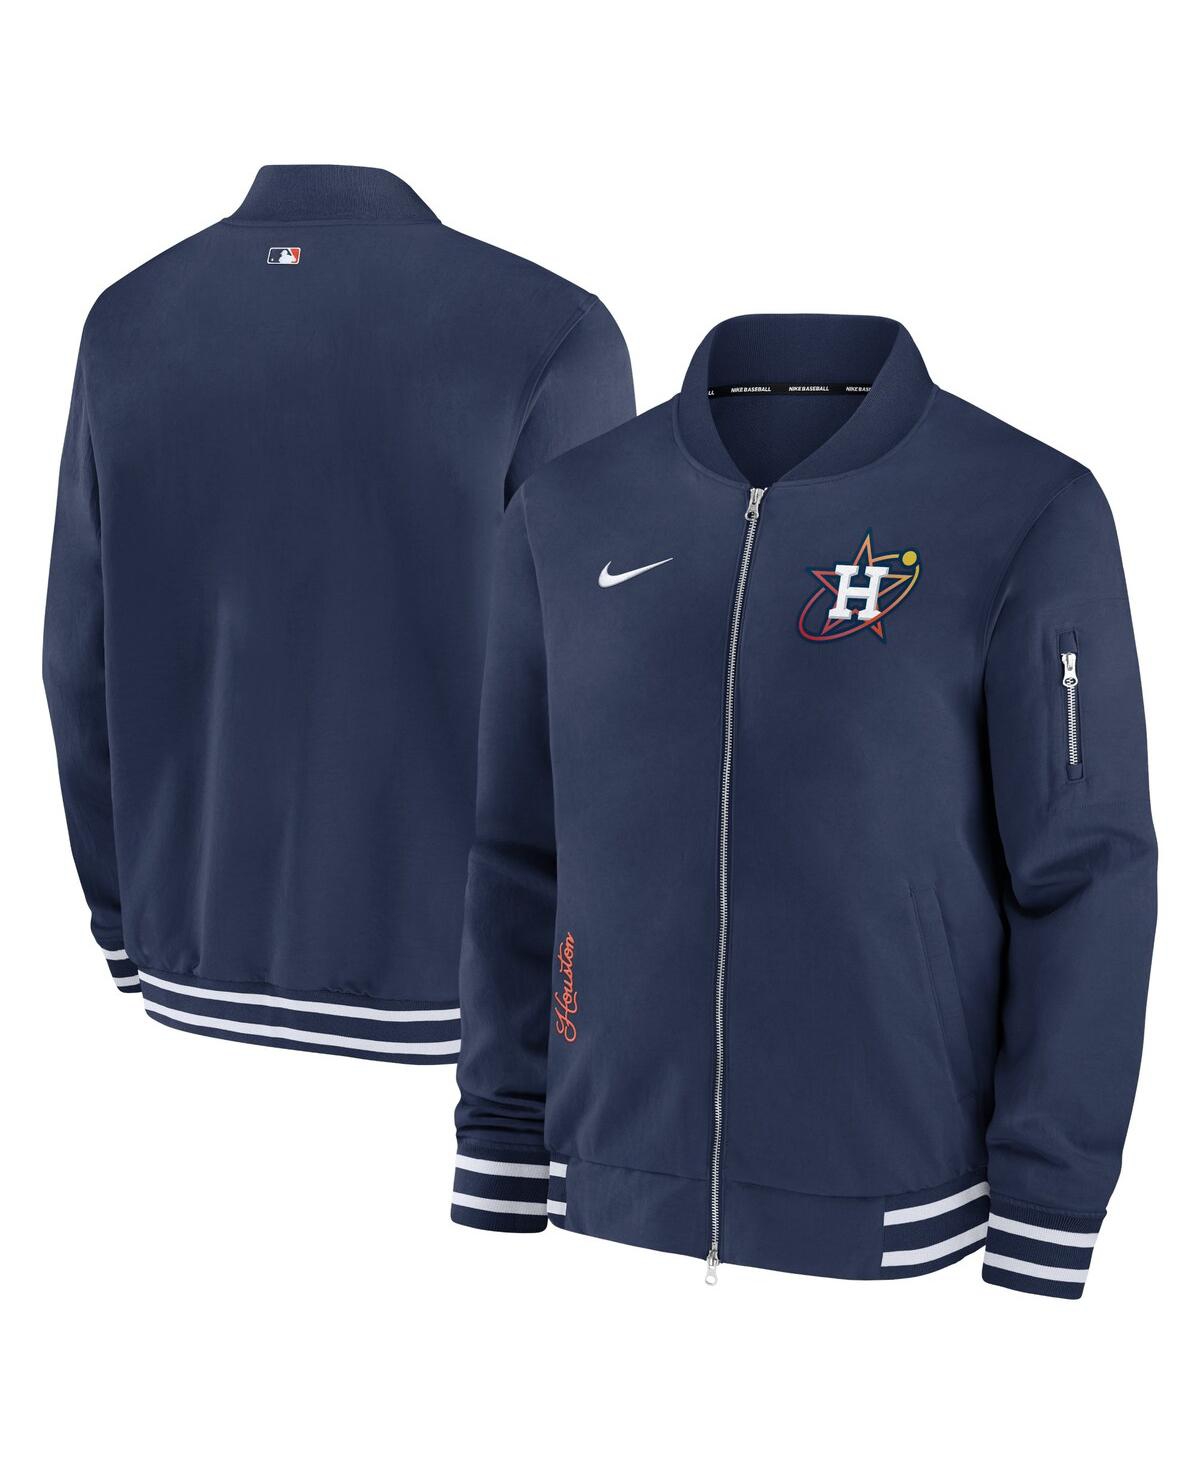 Men's Nike Navy Houston Astros Authentic Collection Game Time Bomber Full-Zip Jacket - Navy